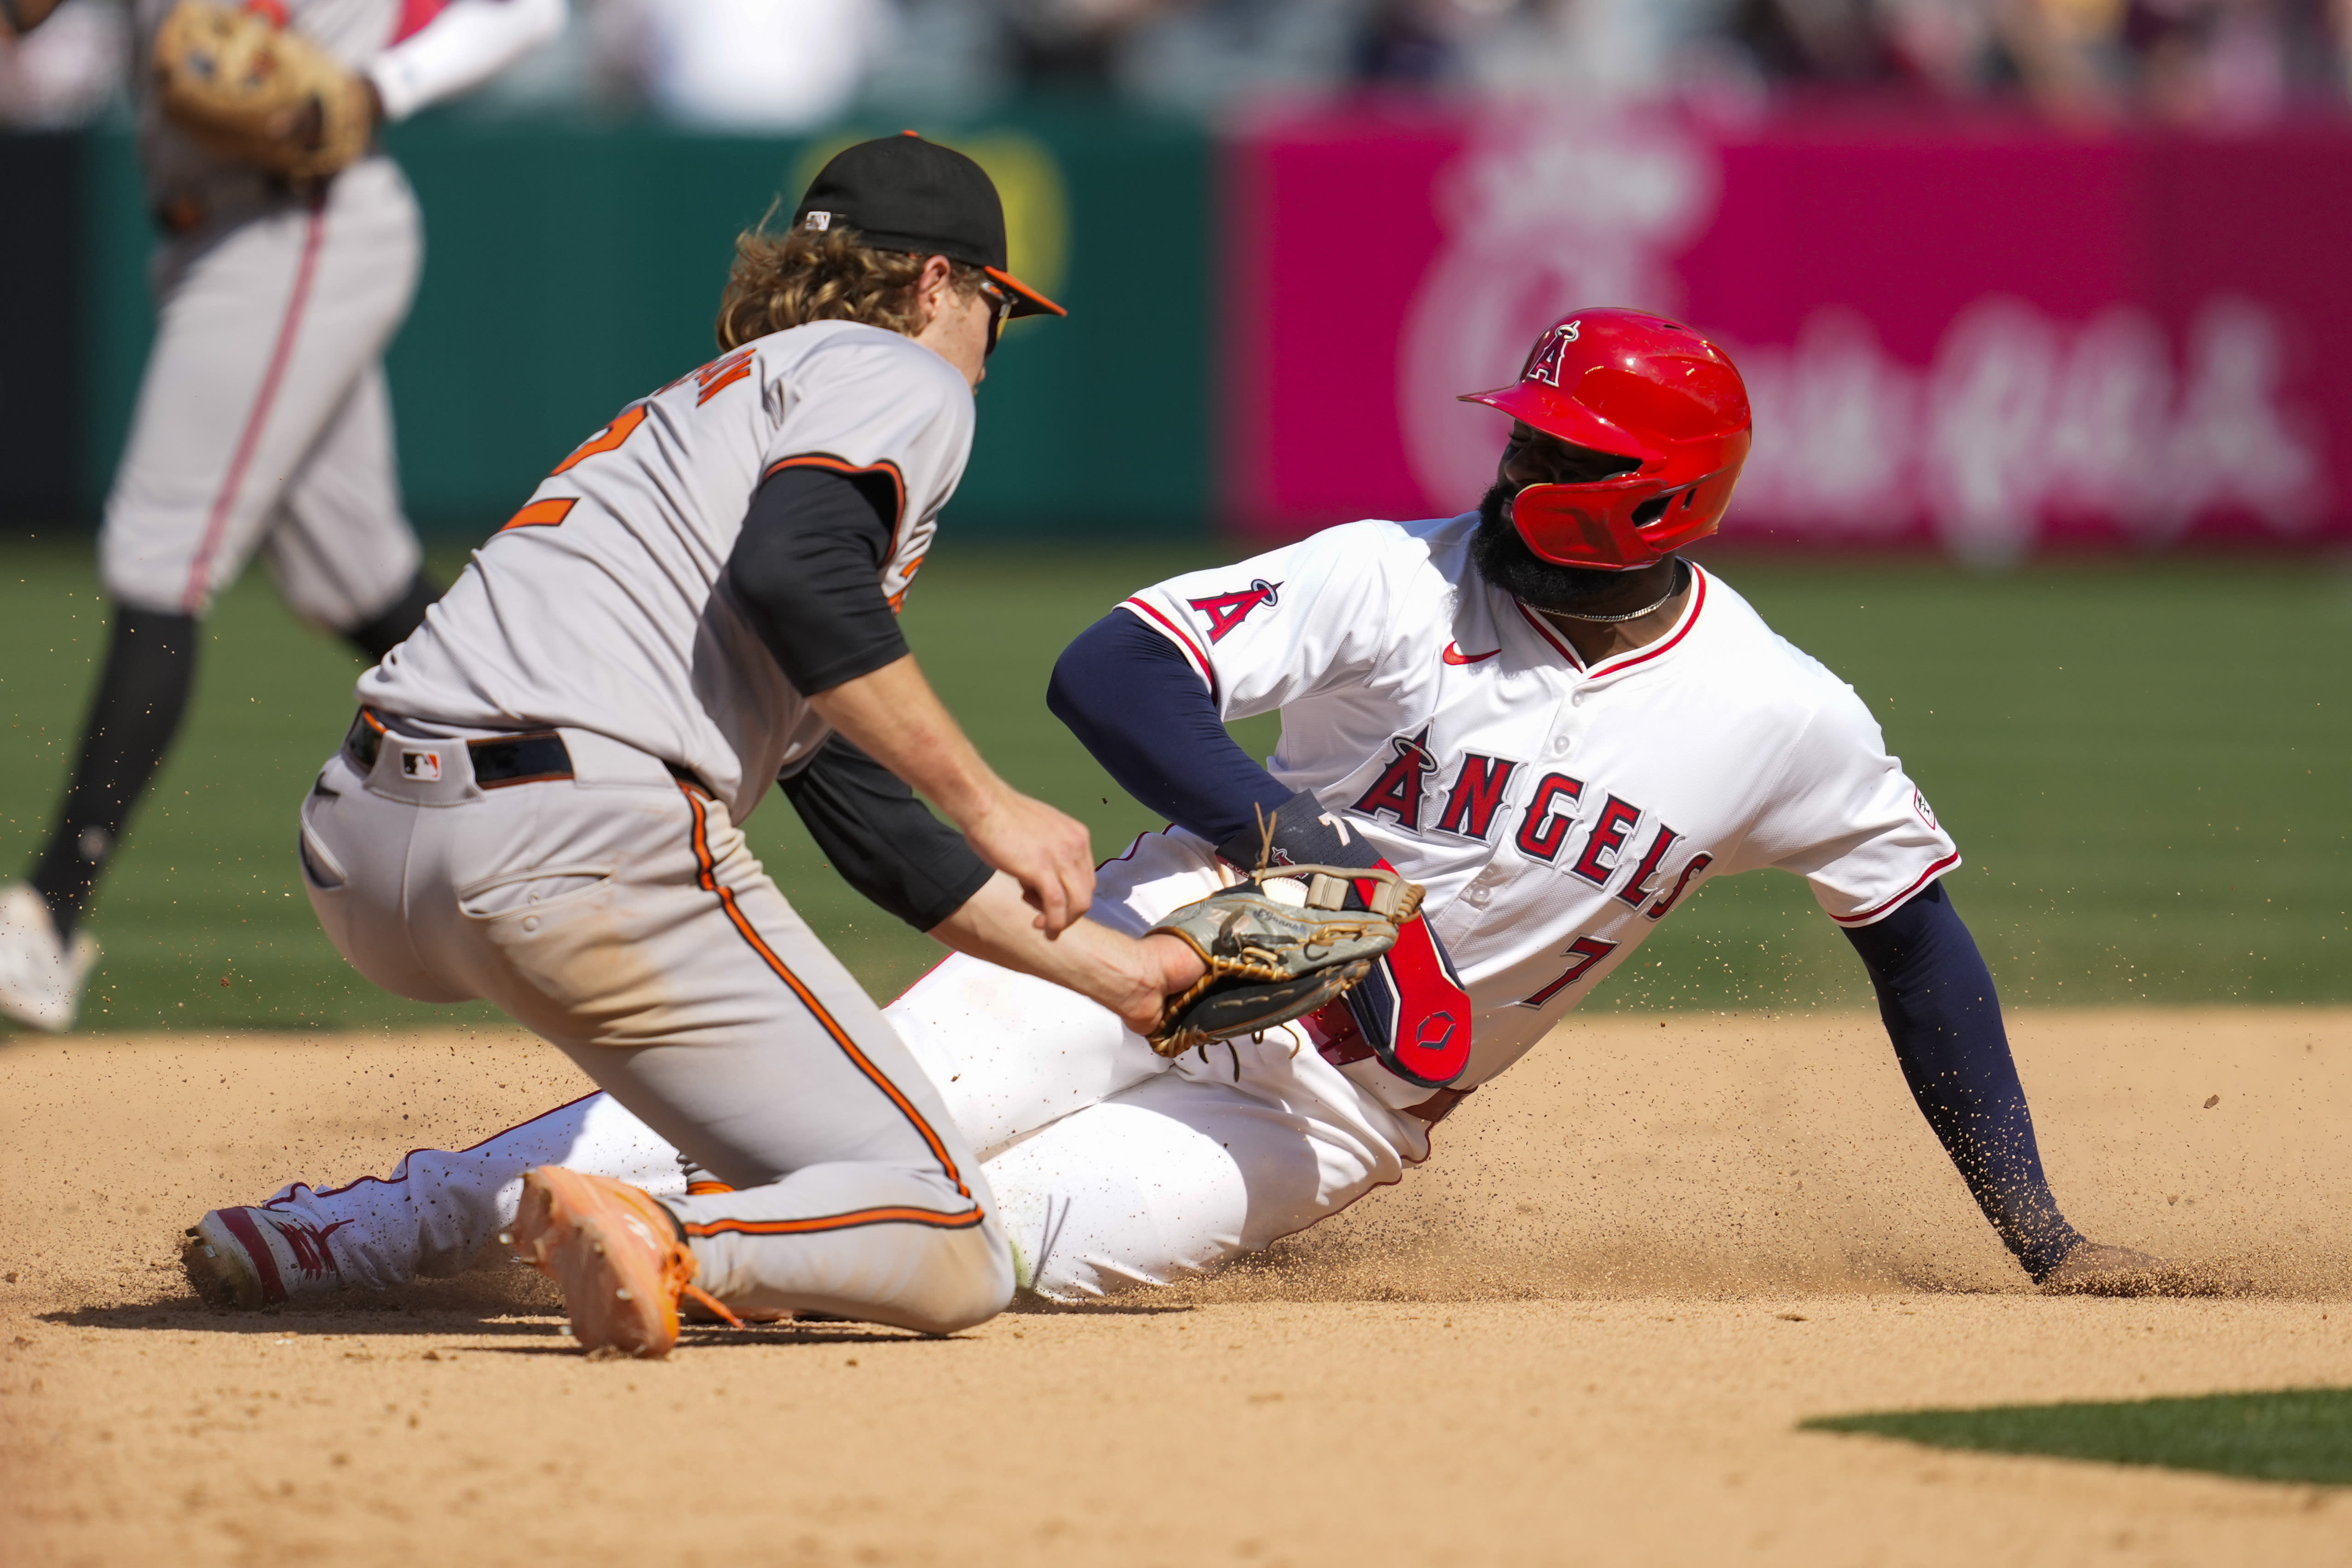 Orioles hold off Angels by throwing out base stealer. Trout becomes 1st in majors to reach 10 homers